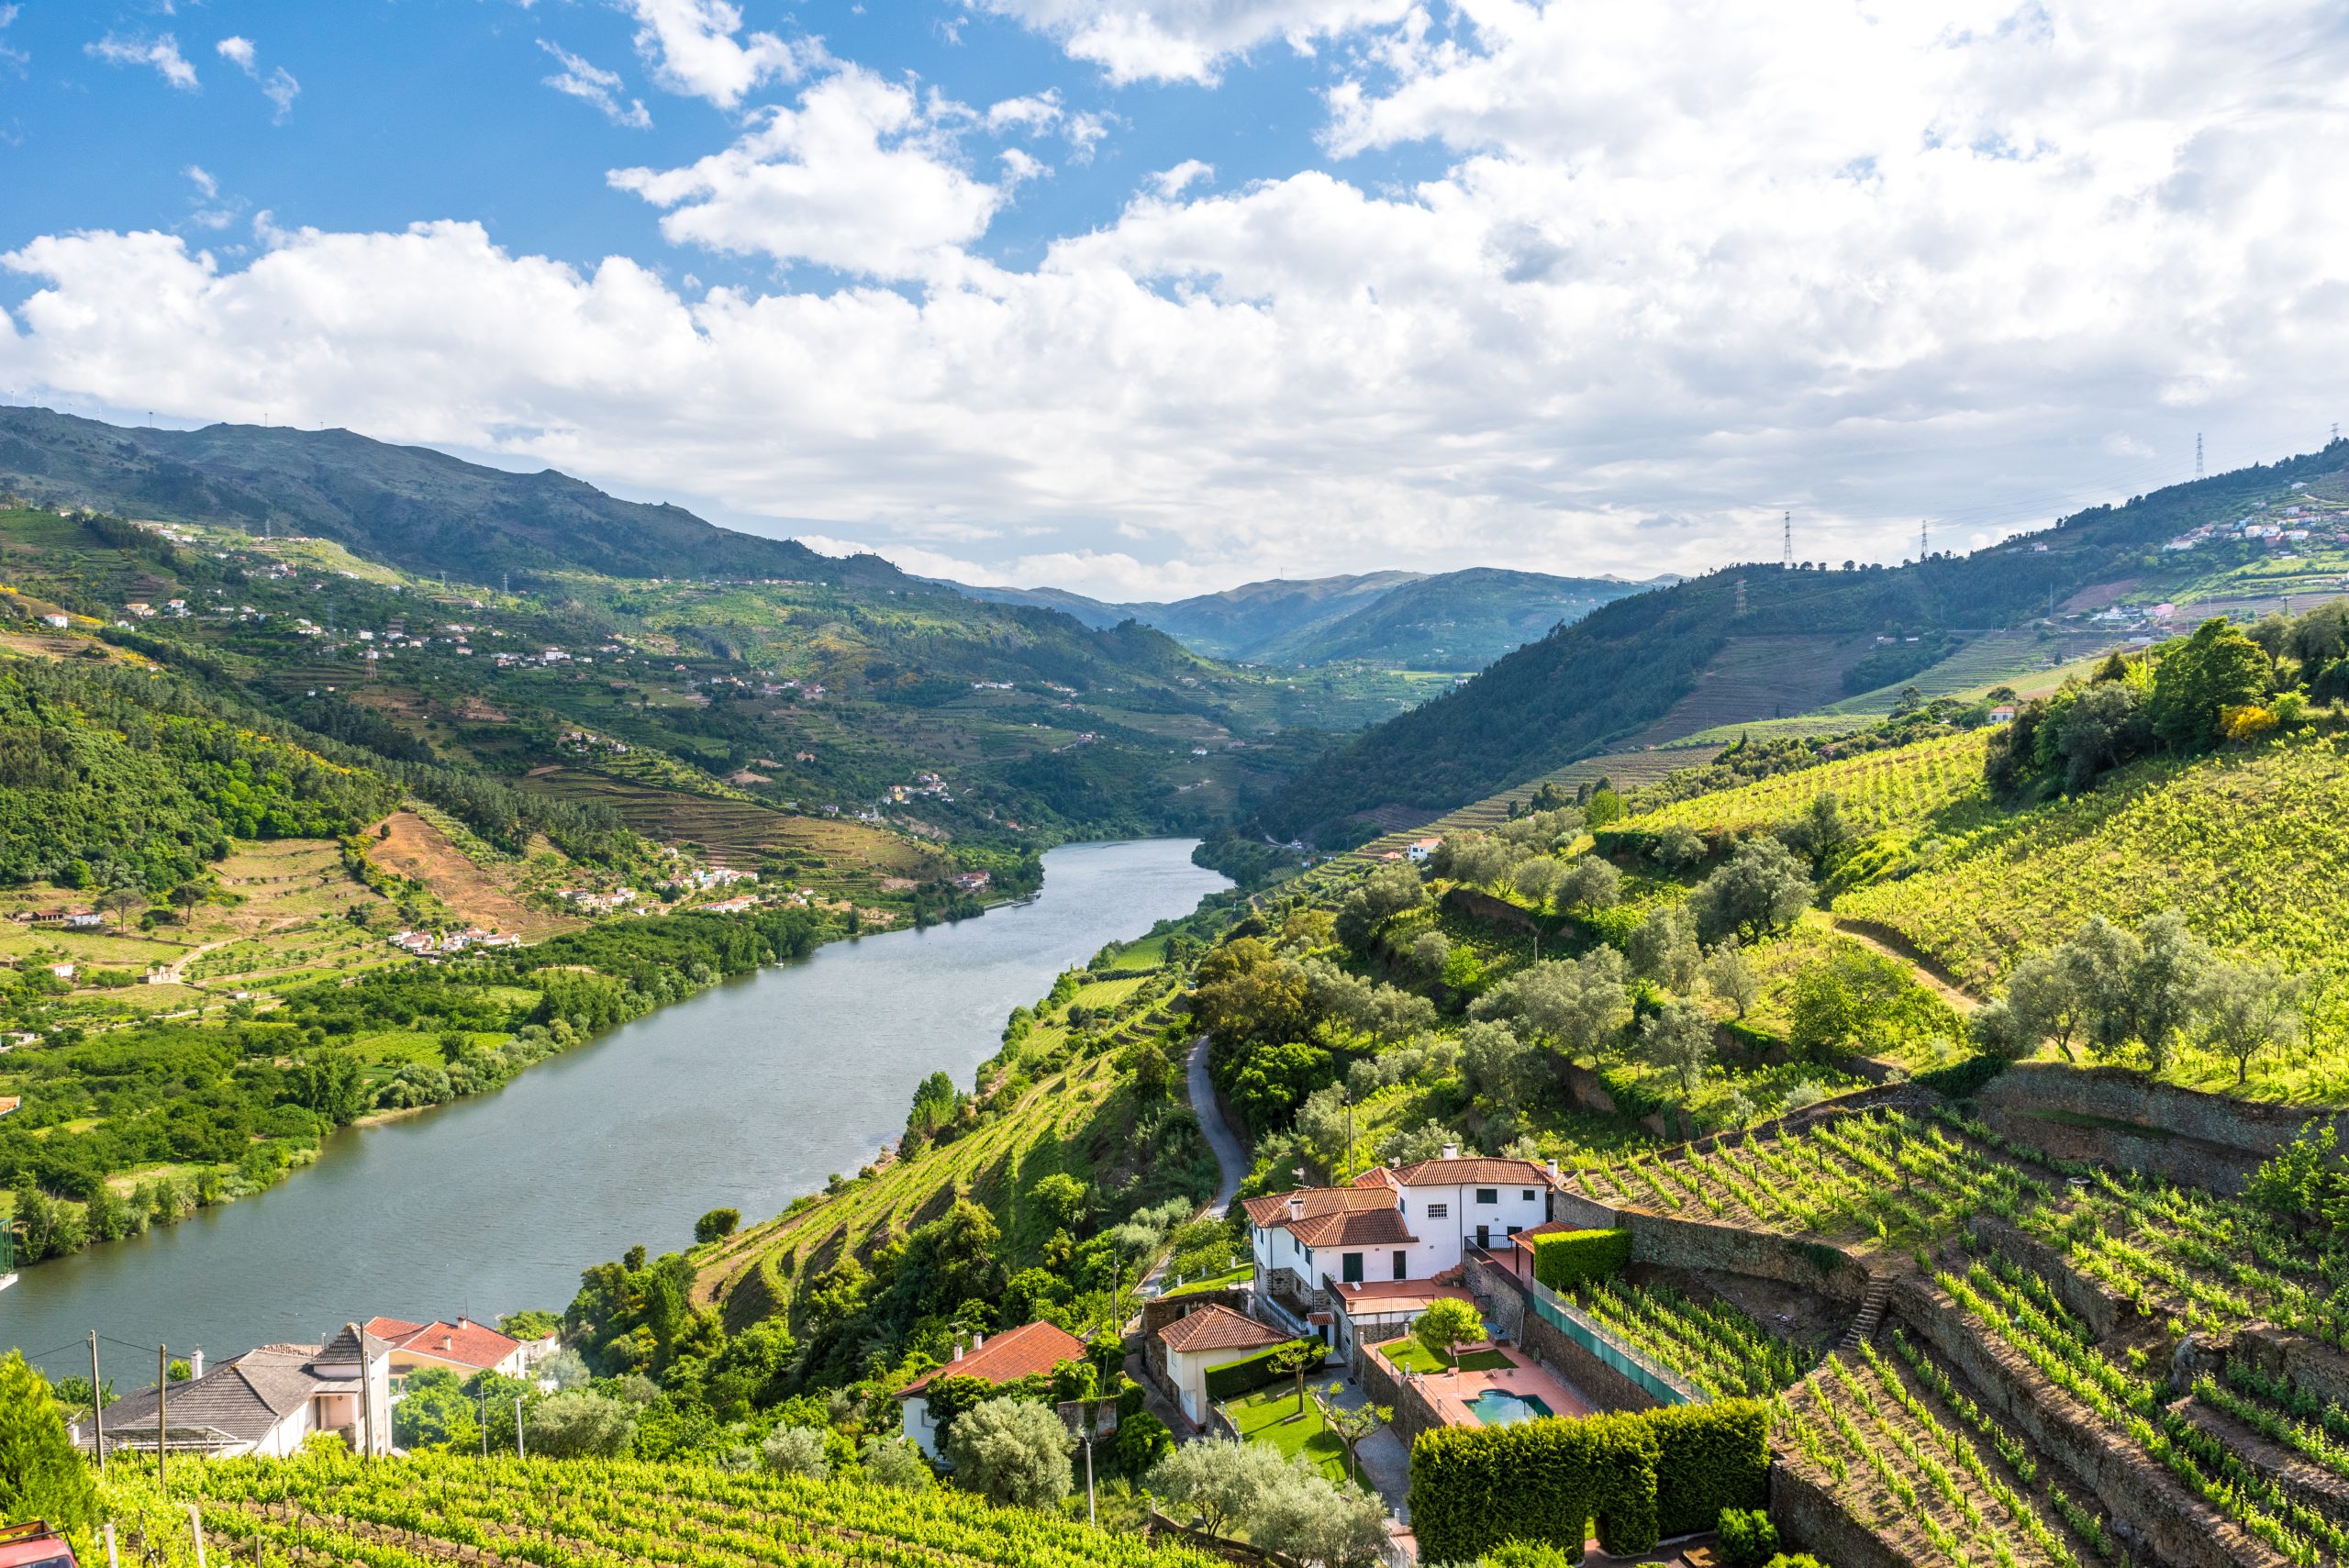 Douro River Valley Cruise with Chateau Montelena